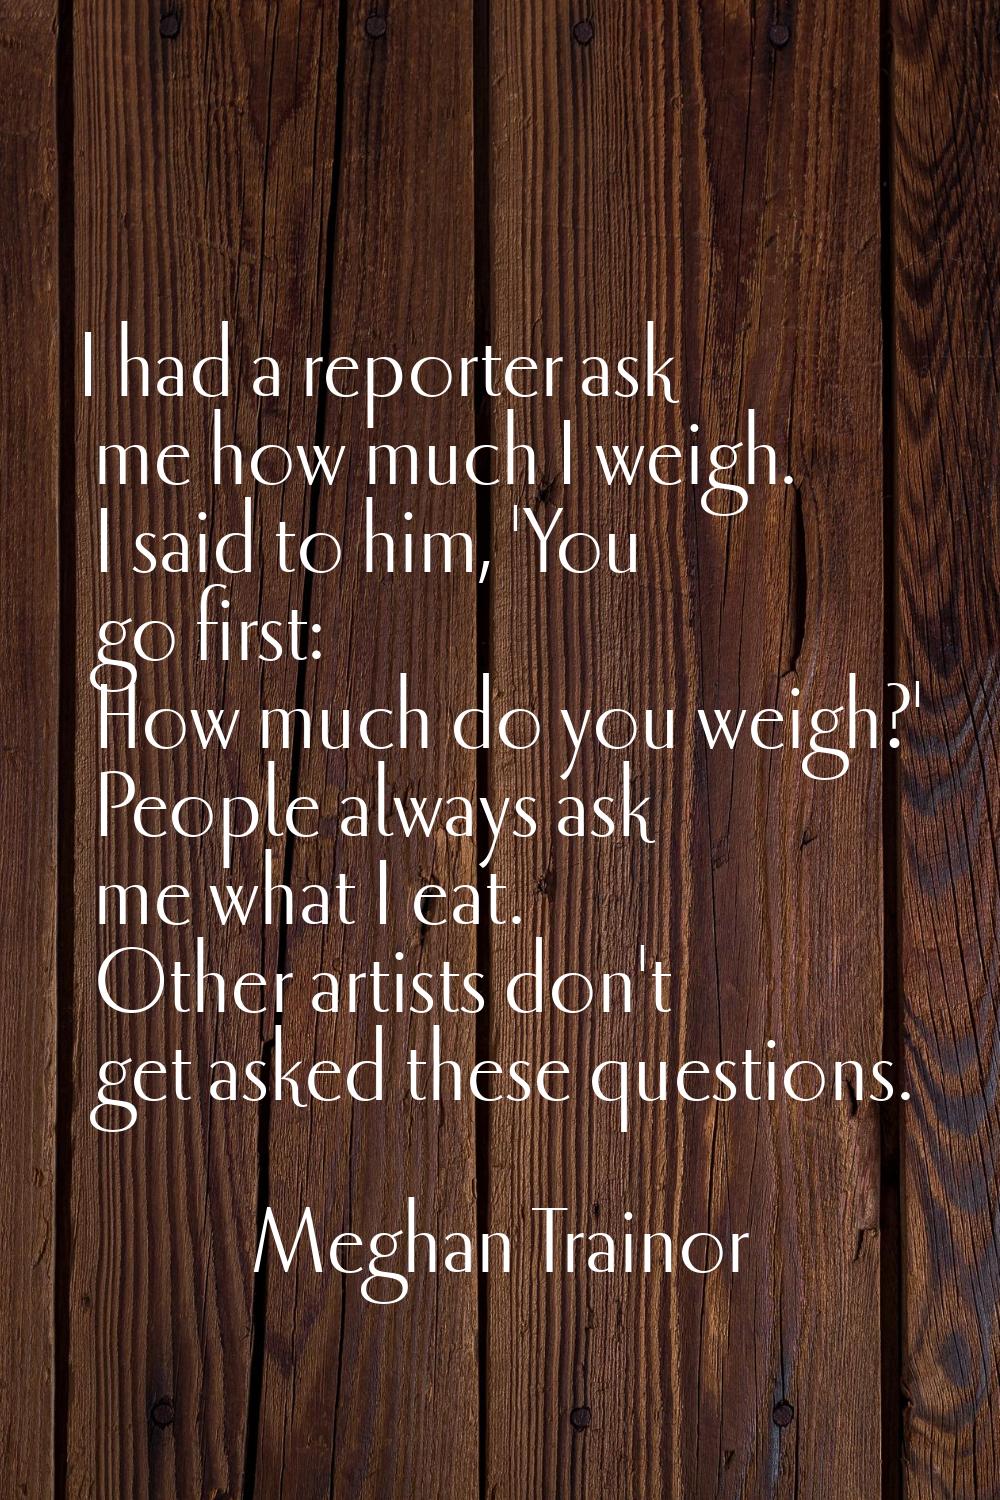 I had a reporter ask me how much I weigh. I said to him, 'You go first: How much do you weigh?' Peo